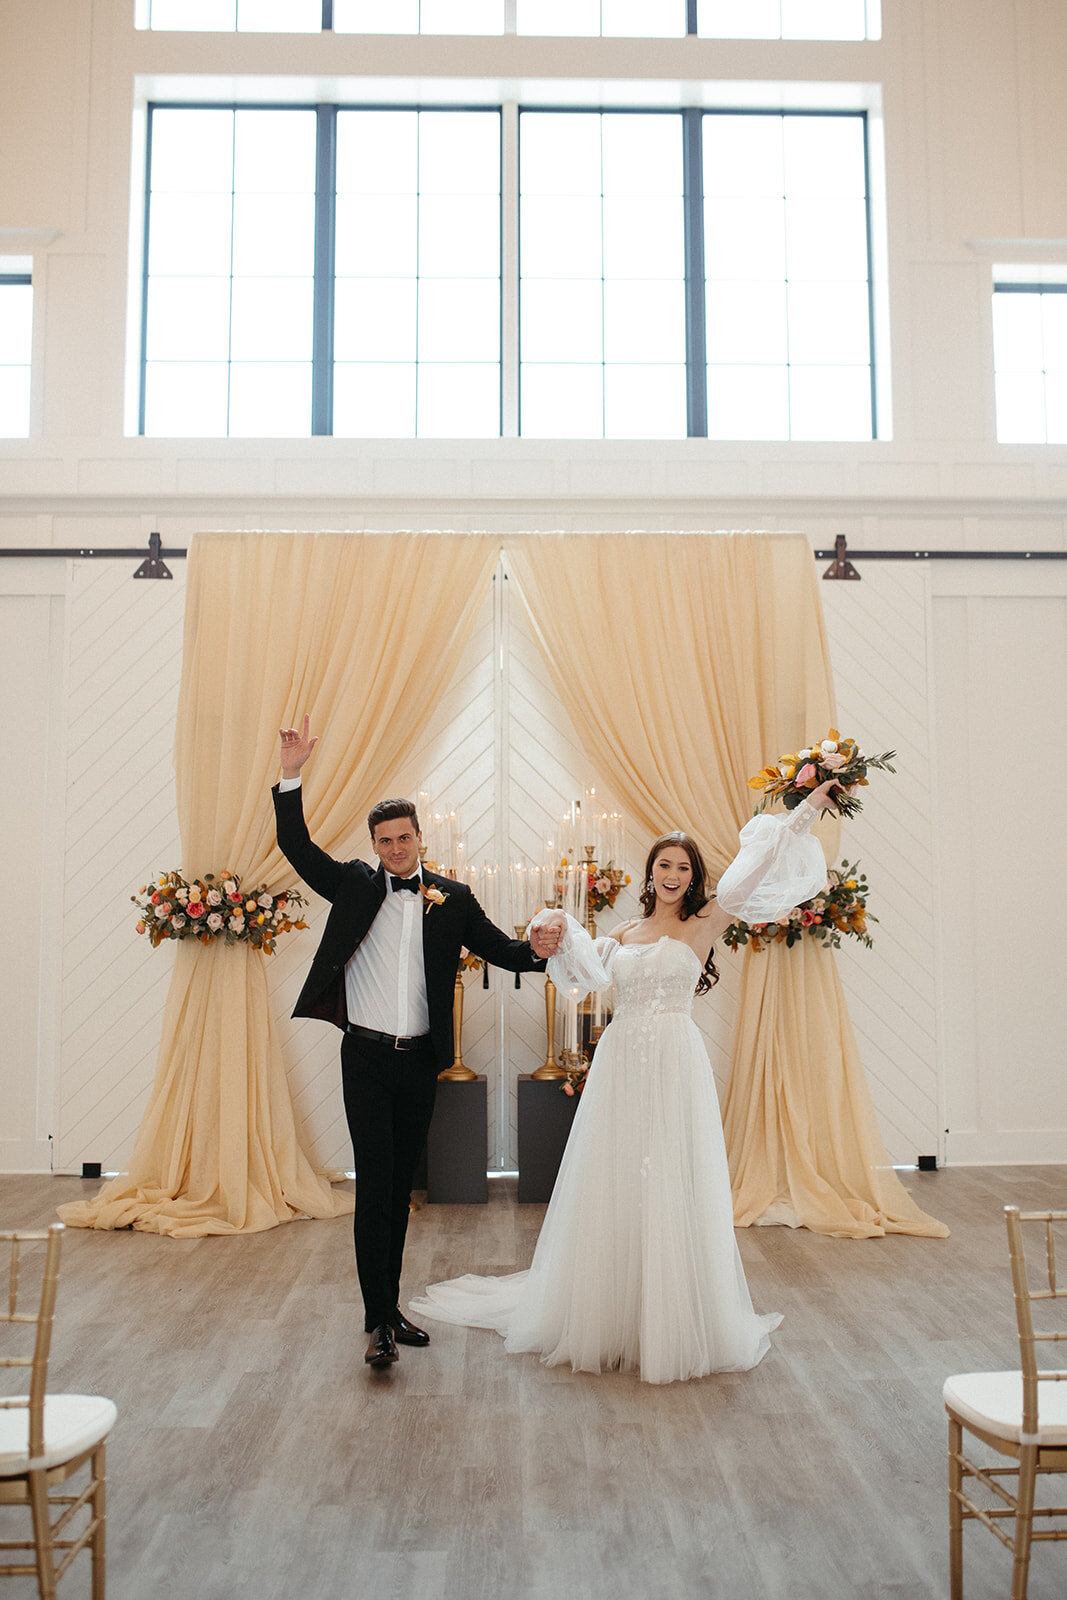 A bride and groom wearing a white wedding gown and black tuxedo pose with one hand in the air in front of peach curtains.